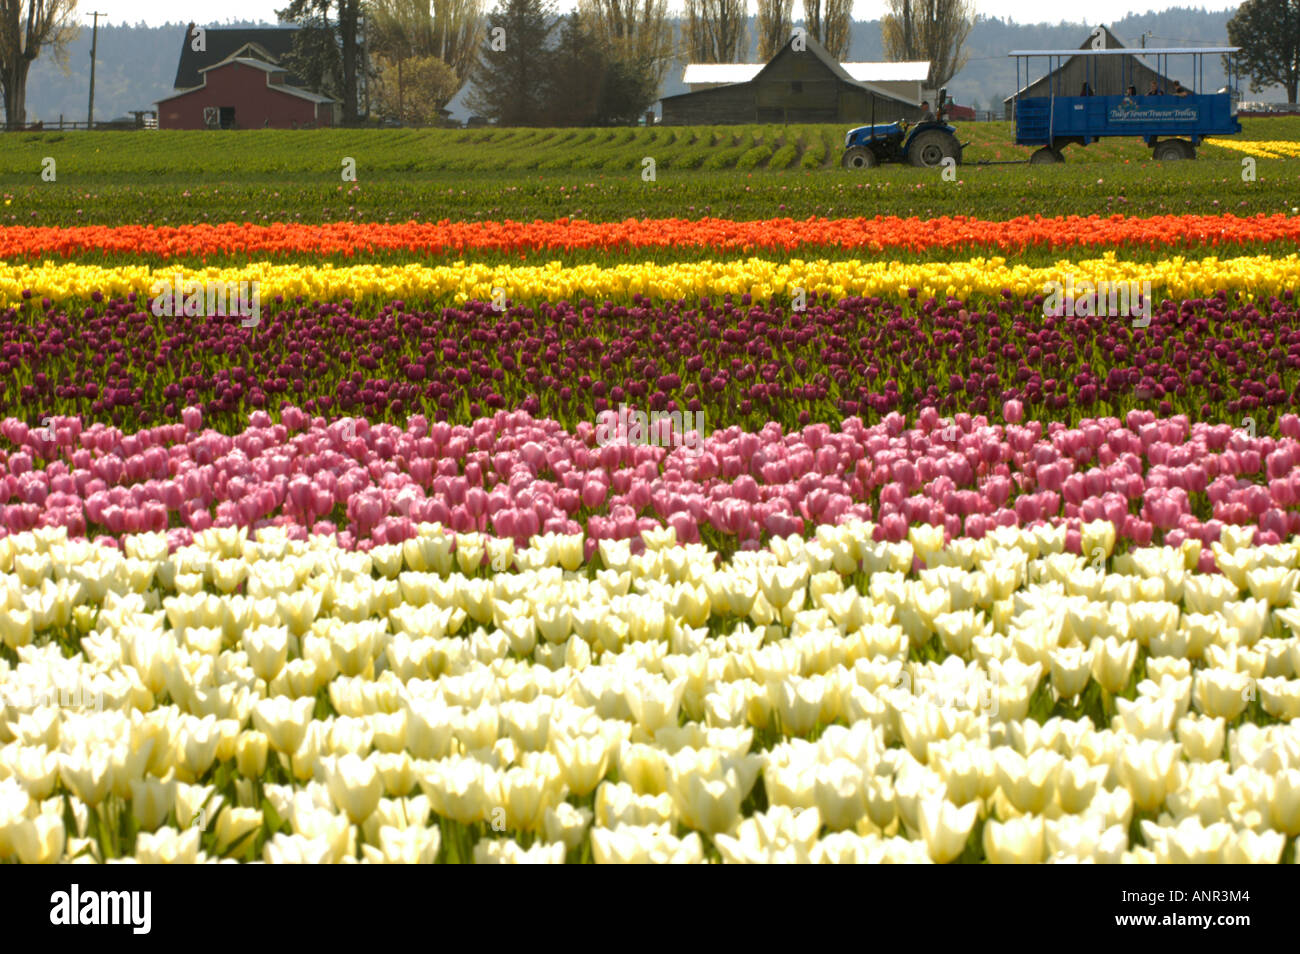 Washington Skagit Valley Colorful rows of tulips in bloom during the Tulip Festival along the Chuckanut scenic highway Stock Photo